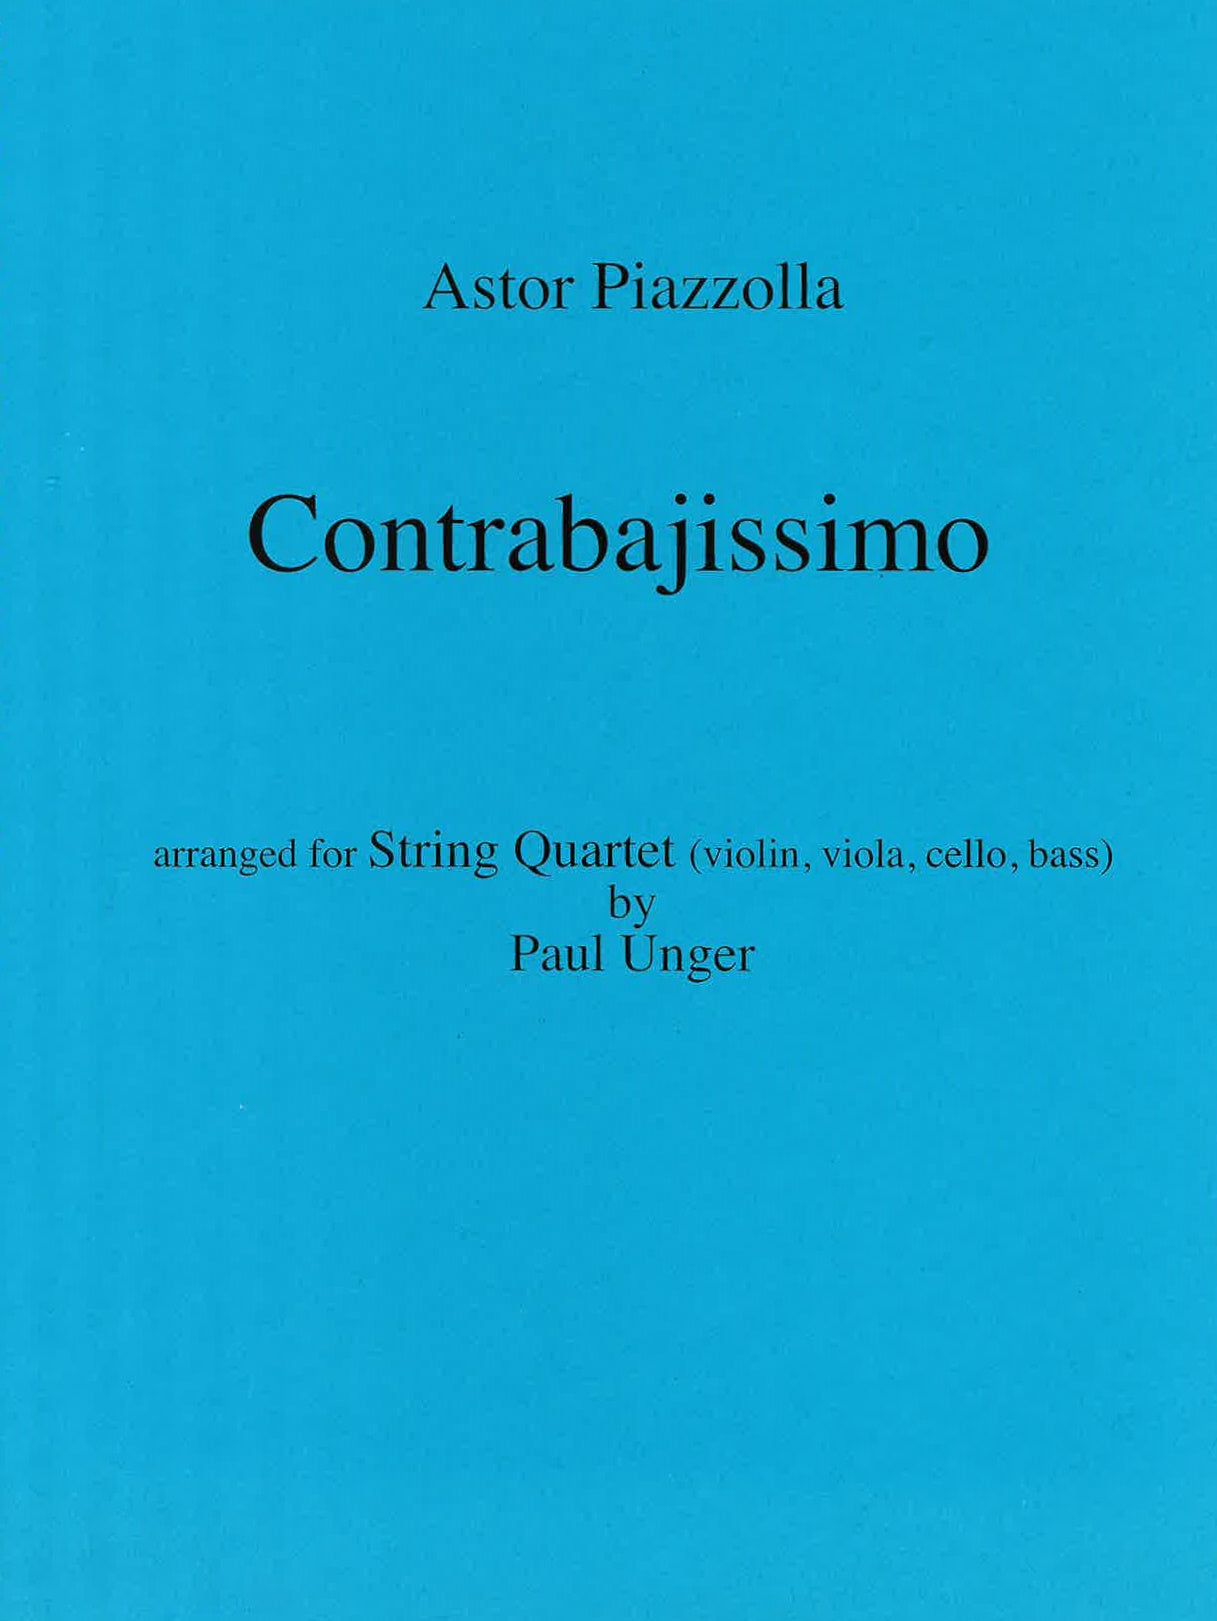 Piazzolla: Contrabajissimo Arranged By Paul Unger for String Quartet